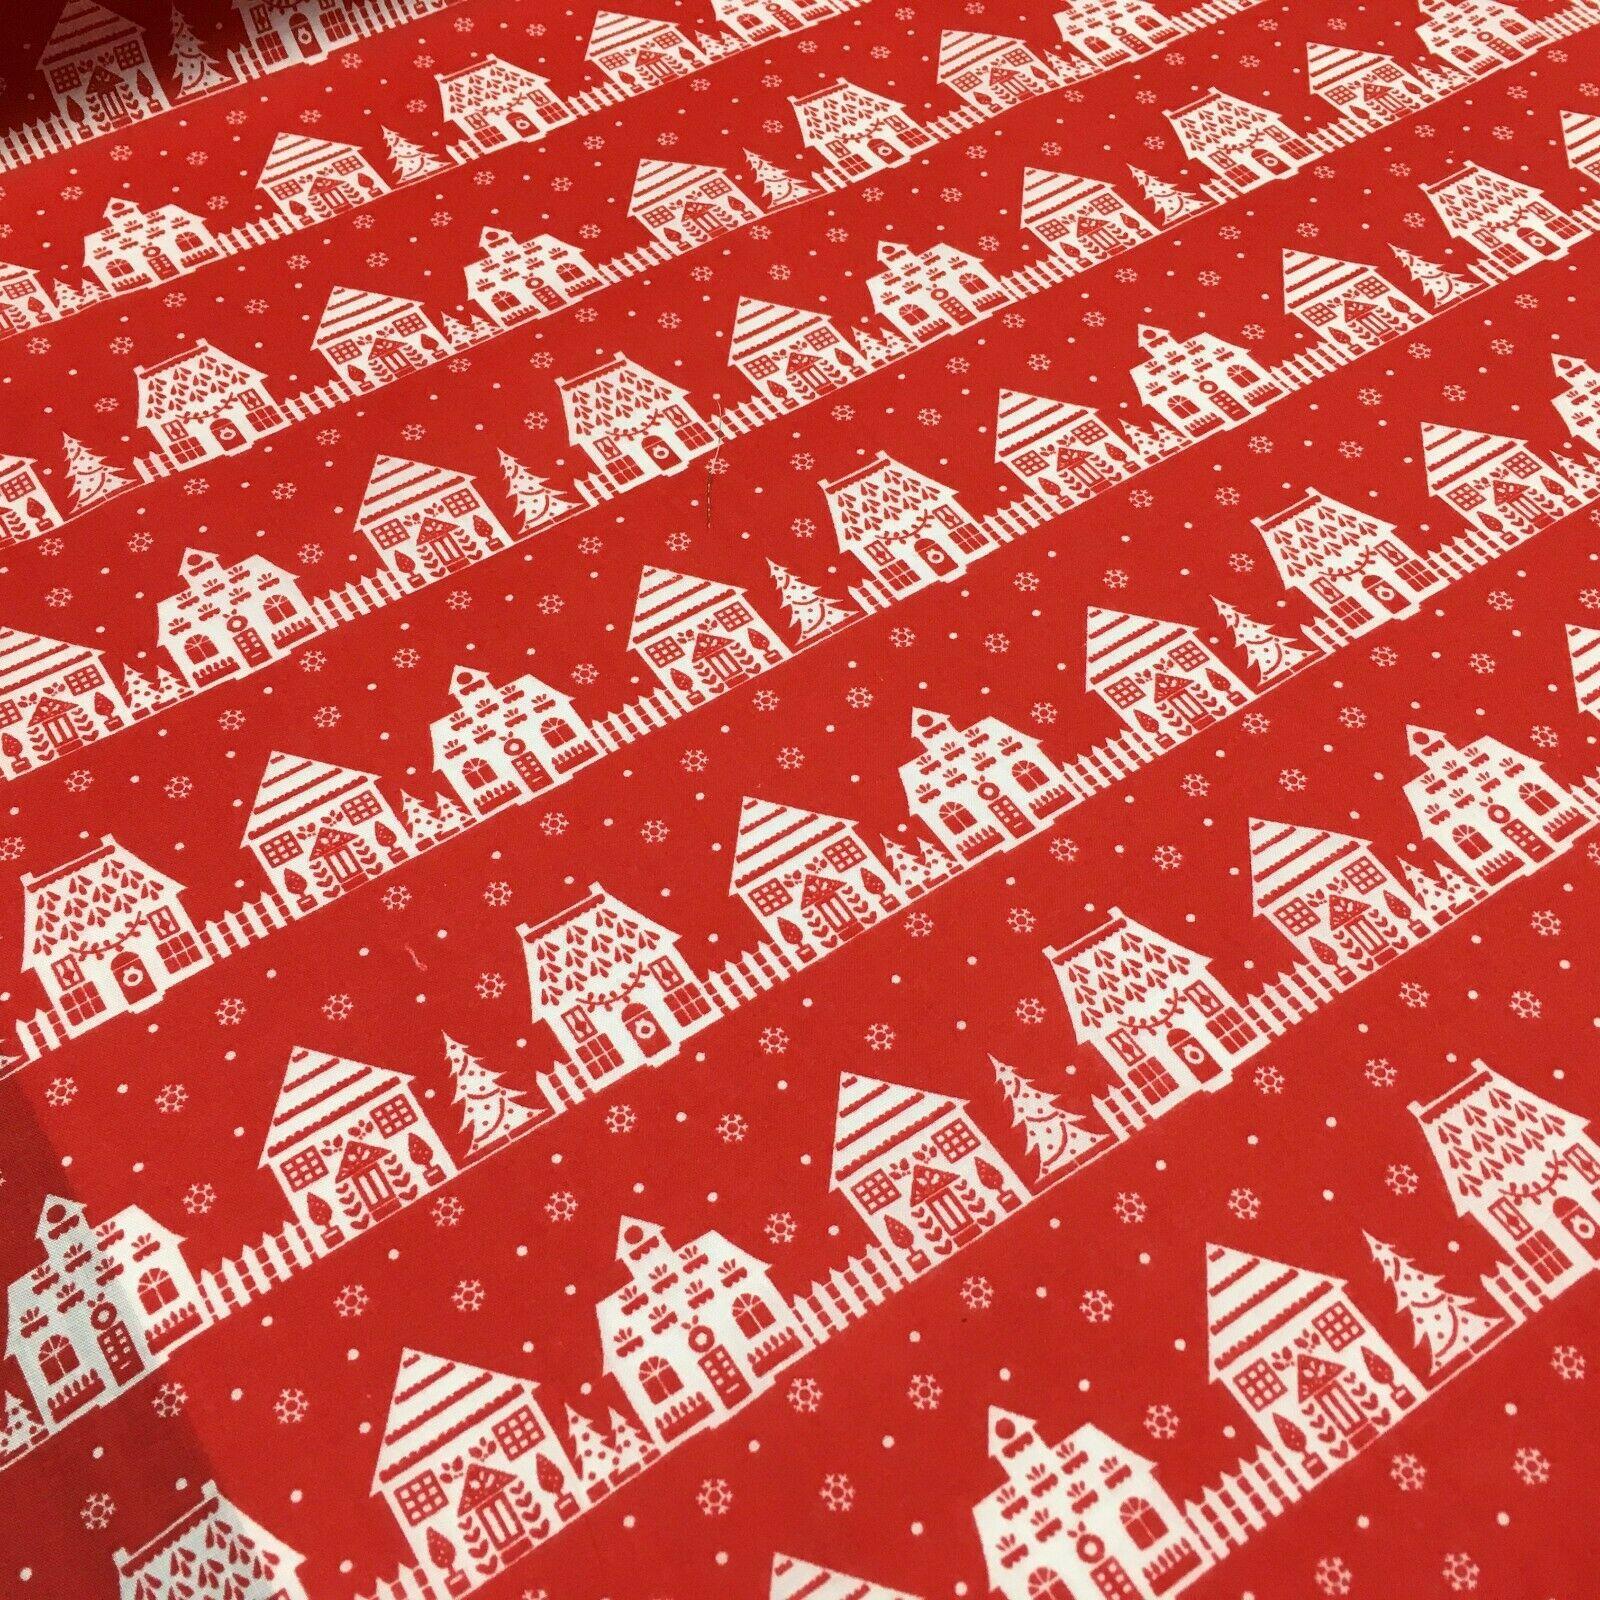 Red Christmas Cottage Printed Polycotton Fabric Craft Gifts 110 cm MD1288 Mtex